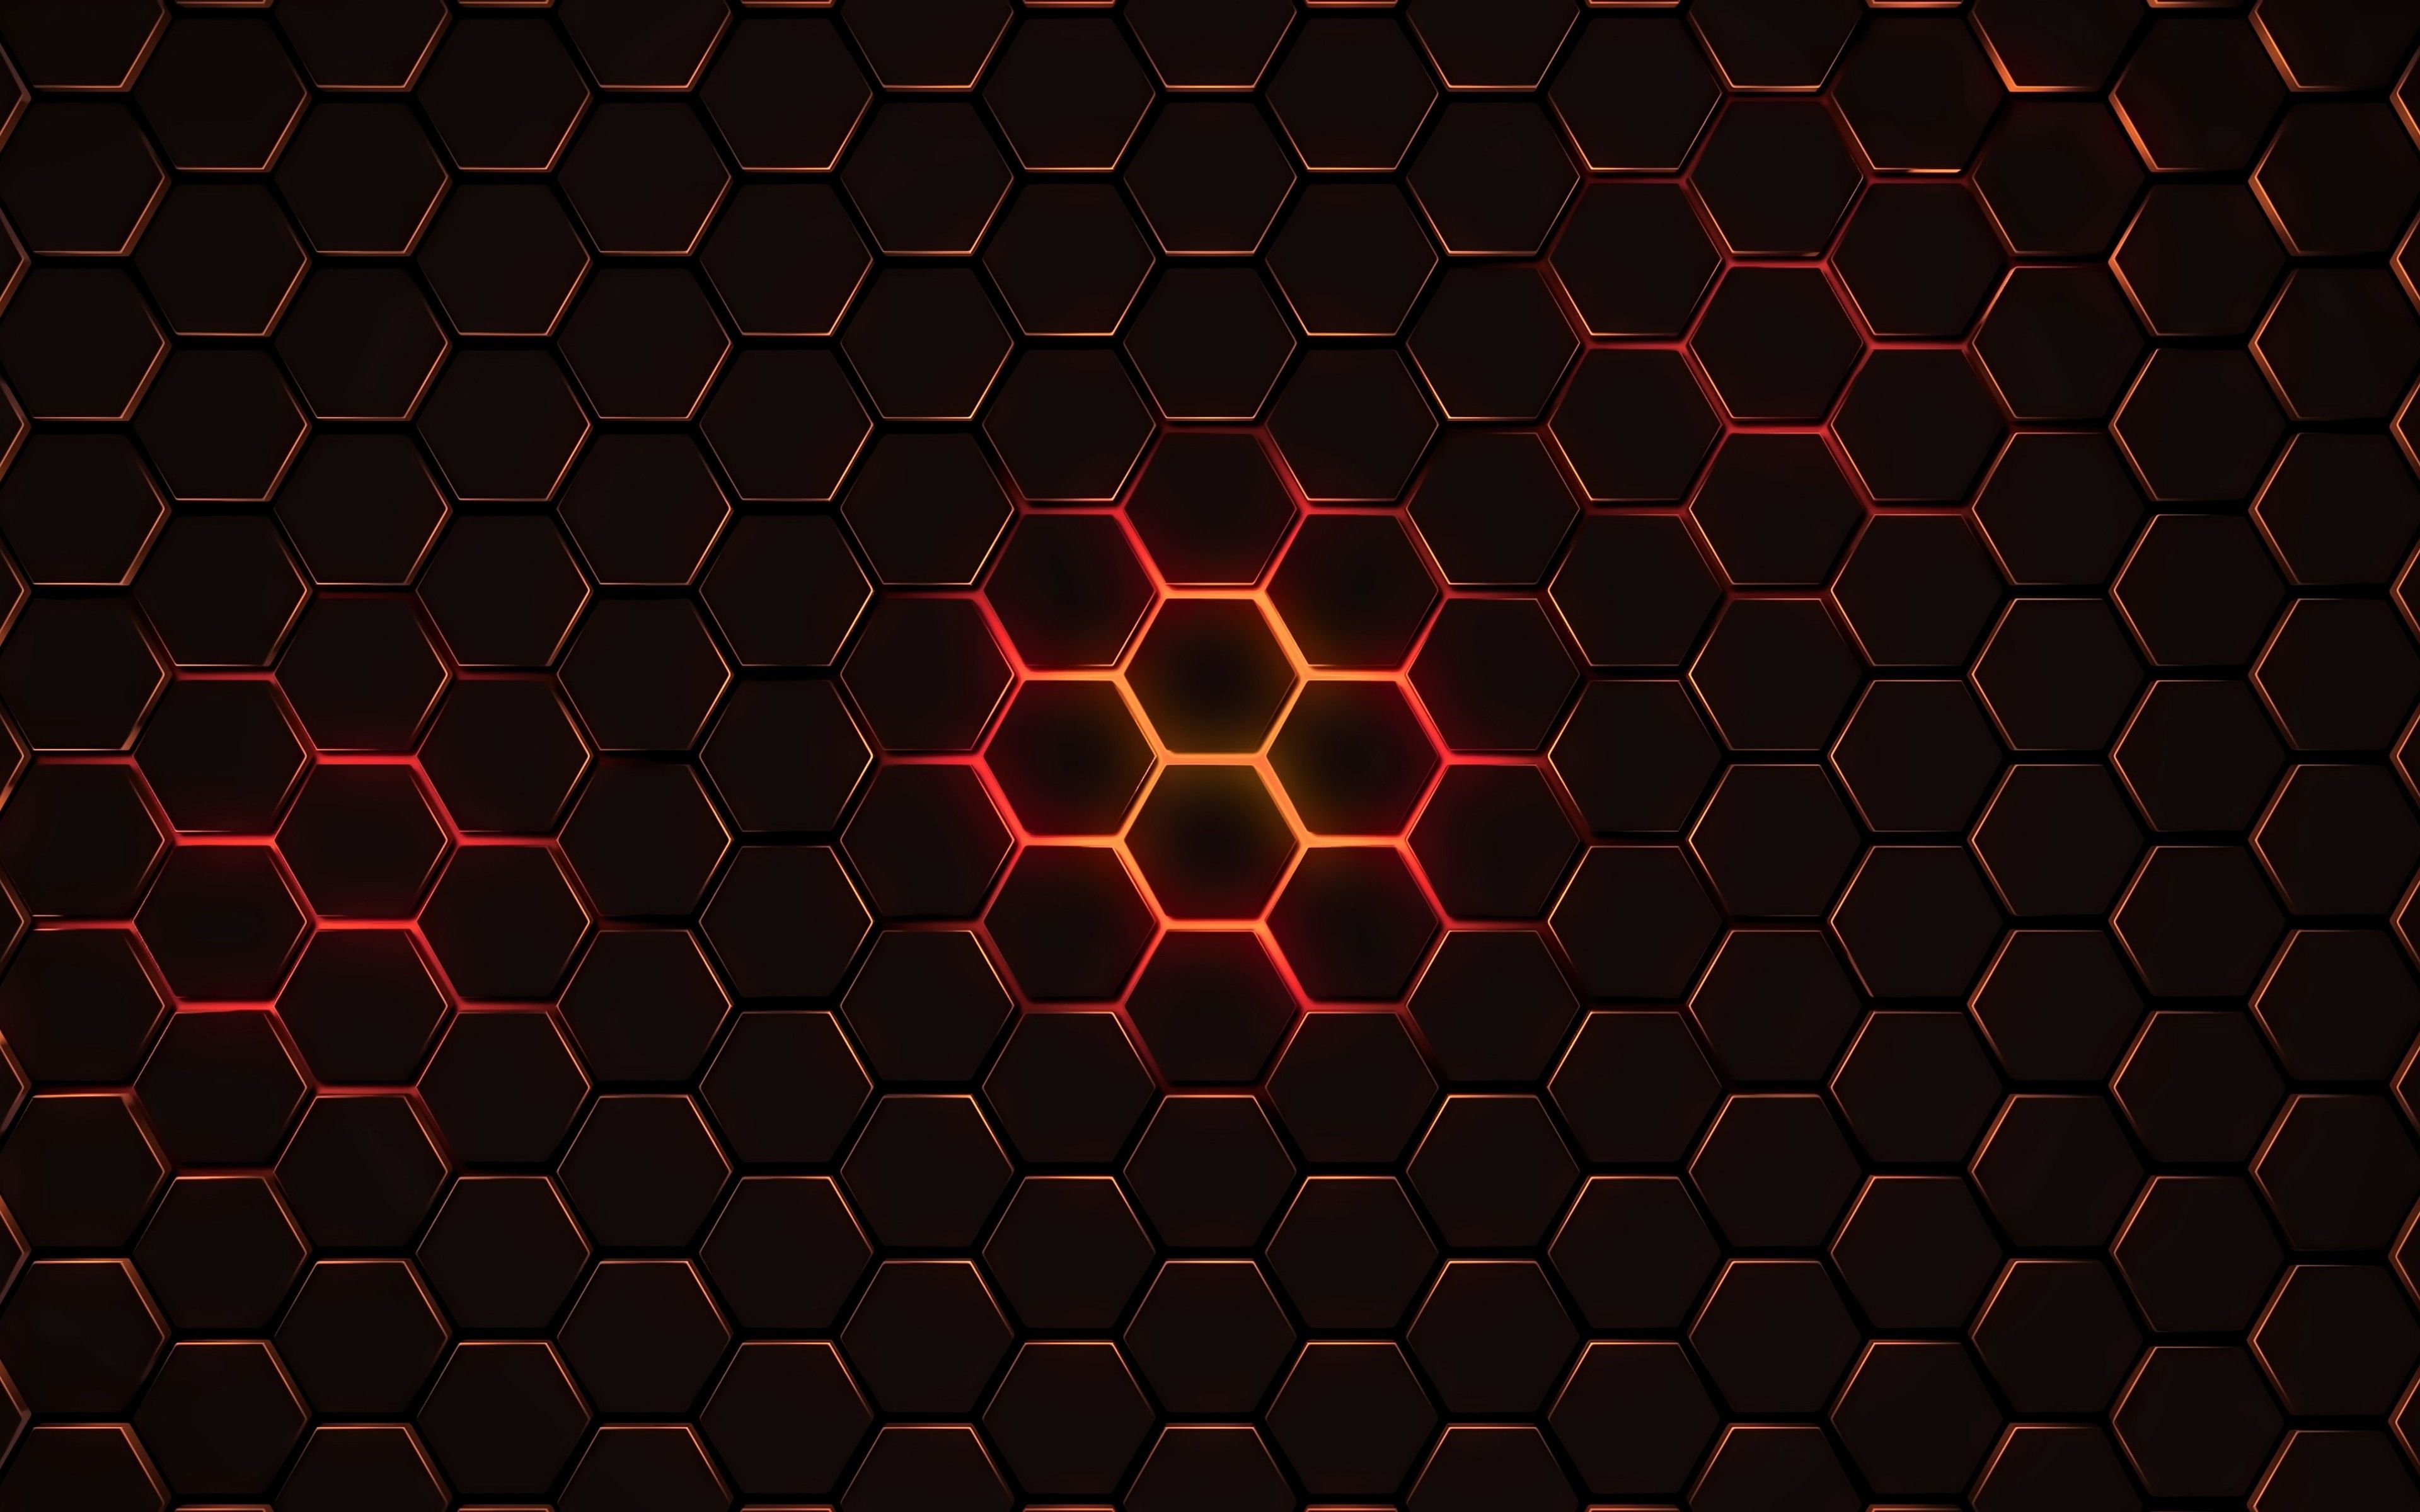 Hexagon pattern background wallpaper for desktop in high quality 4k HD resolution. We have best collection of geometr. Geometria, Fundo para convite, Of wallpaper